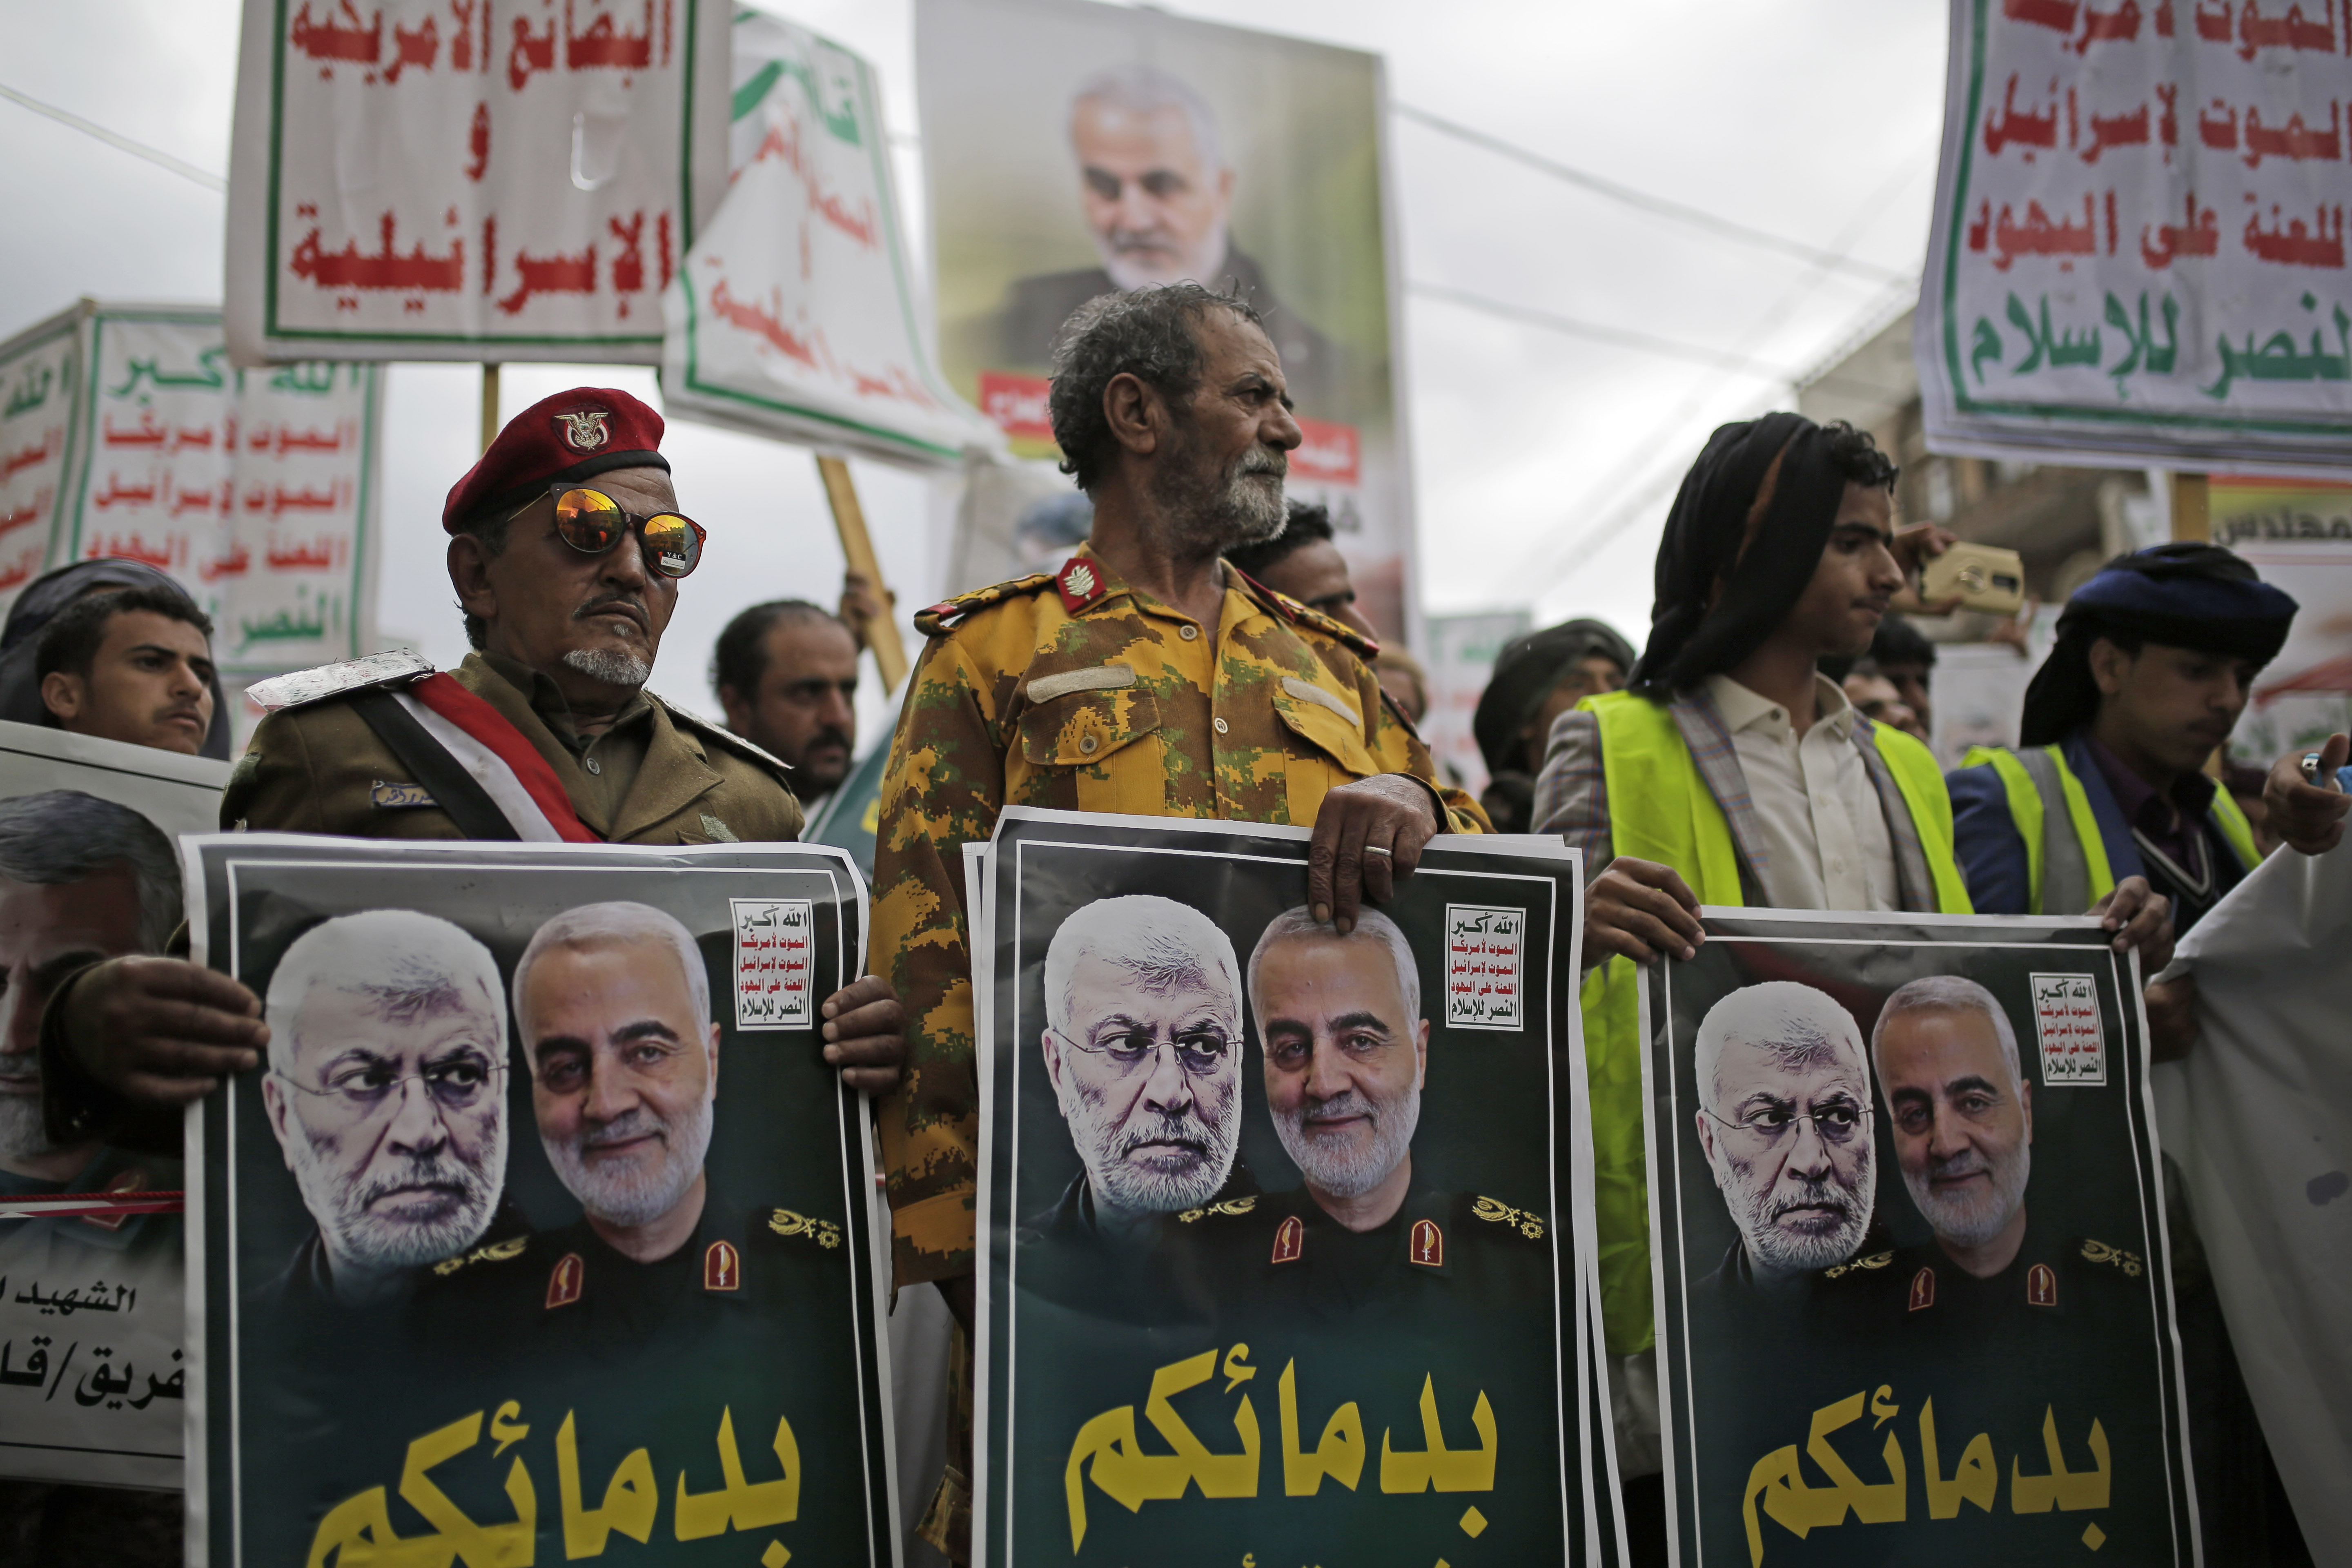 Yemeni Shiite Houthis hold posters of Iraqi militia commander Abu Mahdi al-Muhandis and Iranian military commander Qassem Soleimani during a protest against a U.S. airstrike in Iraq that killed them both, in Sanaa, Yemen, Monday, Jan. 6, 2020. Arabic writing on posters that reads, 